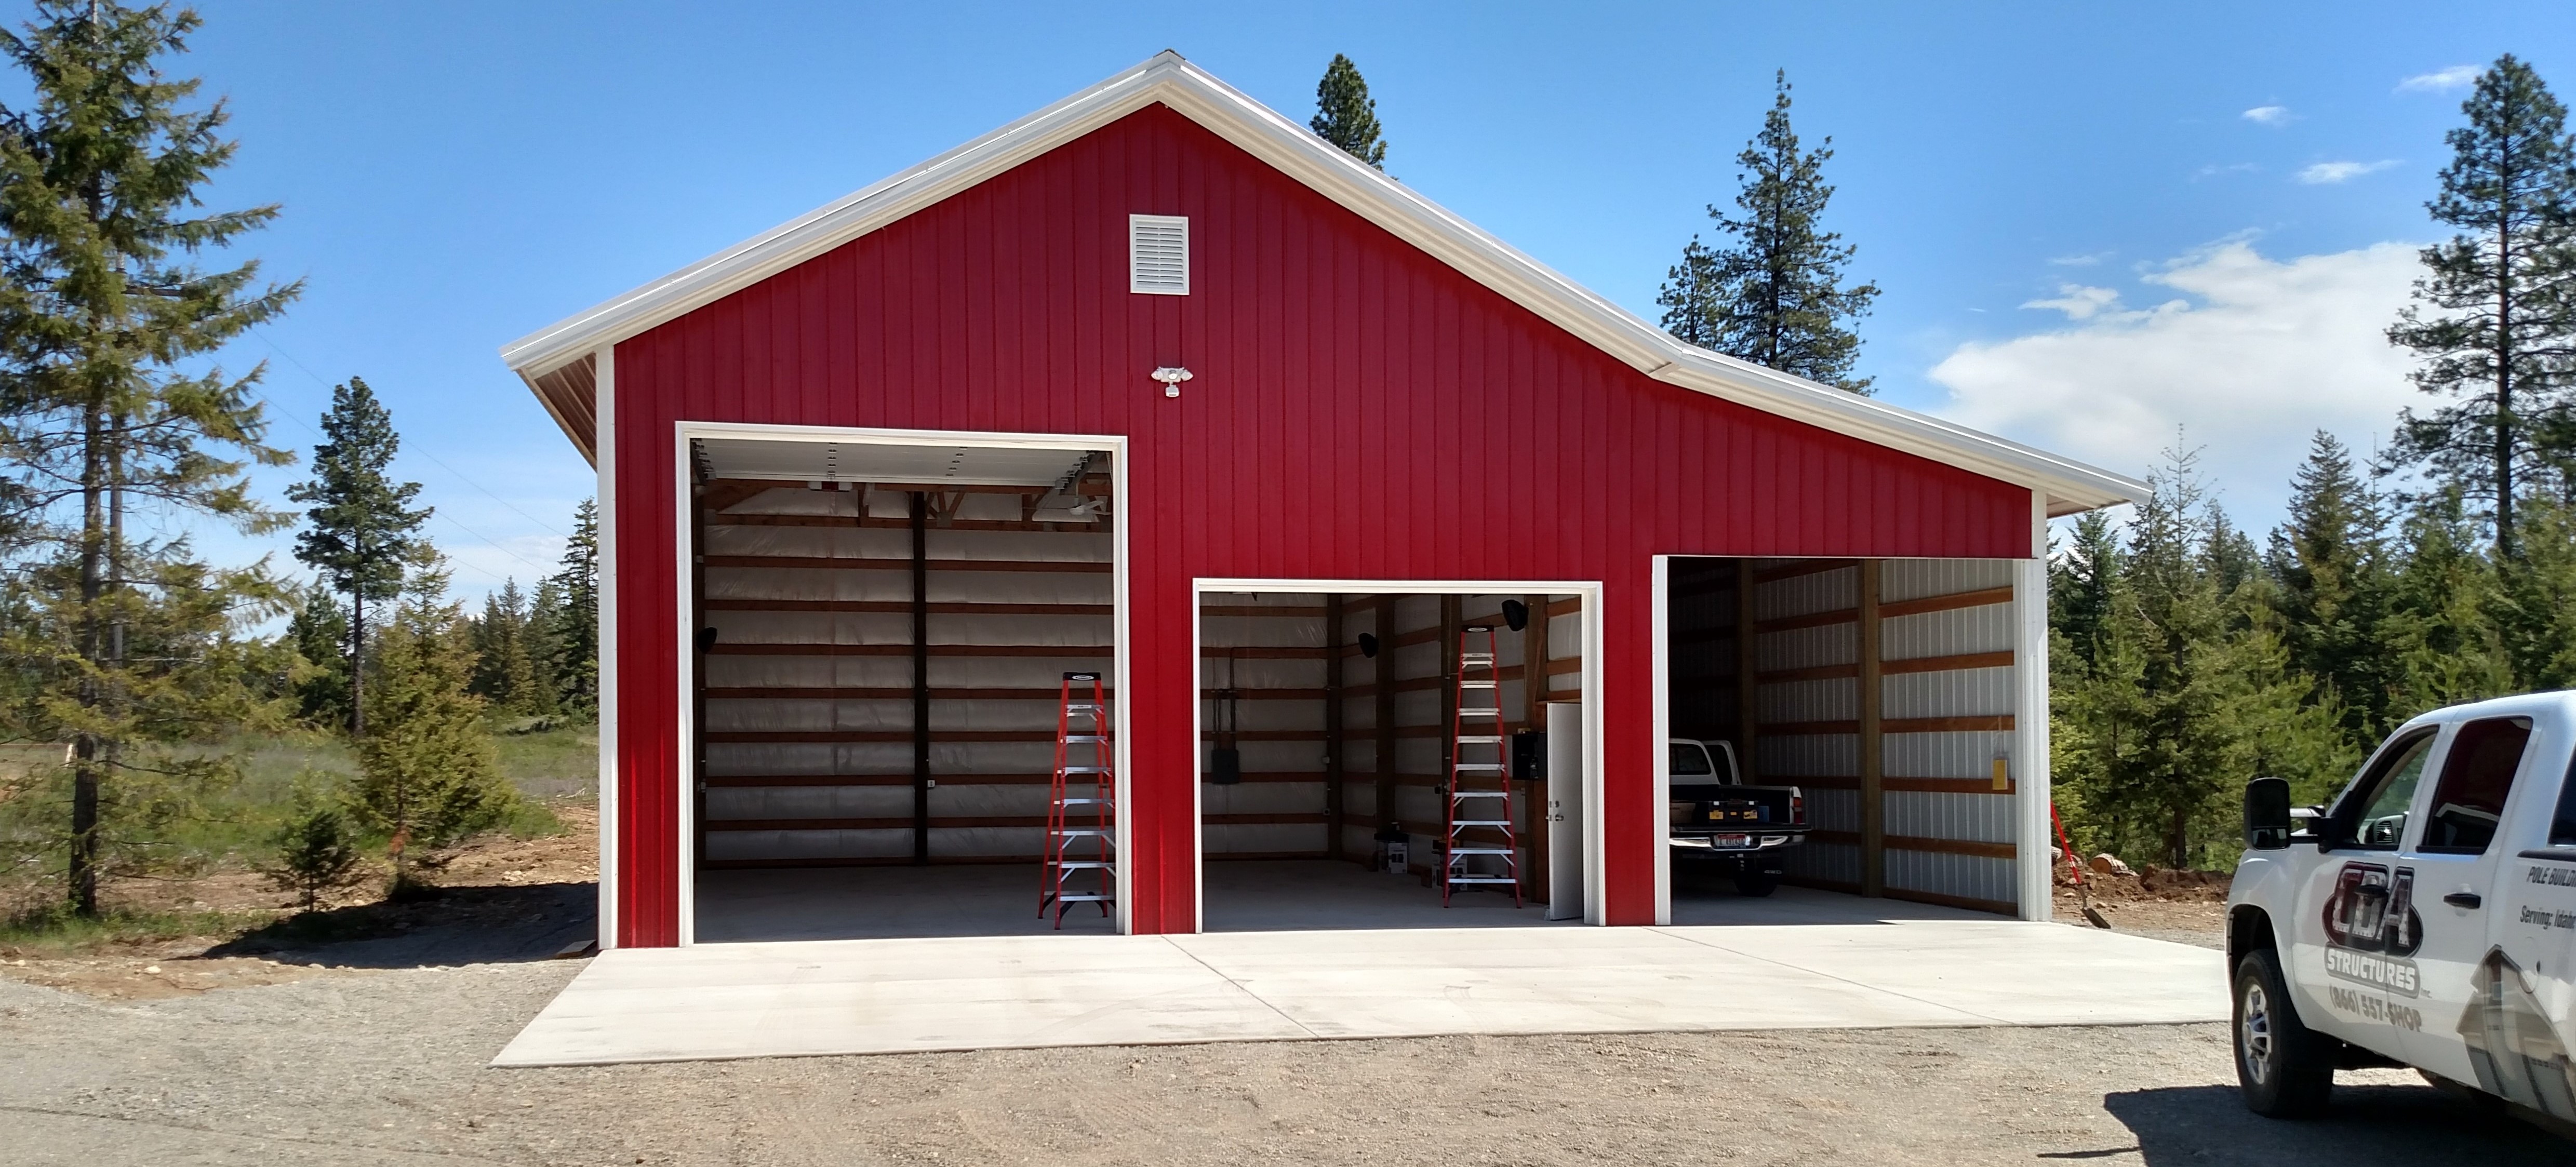 Cda Structures Specializing In Residential Commercial Pole Buildings Shops Garages In Id Wa Mt